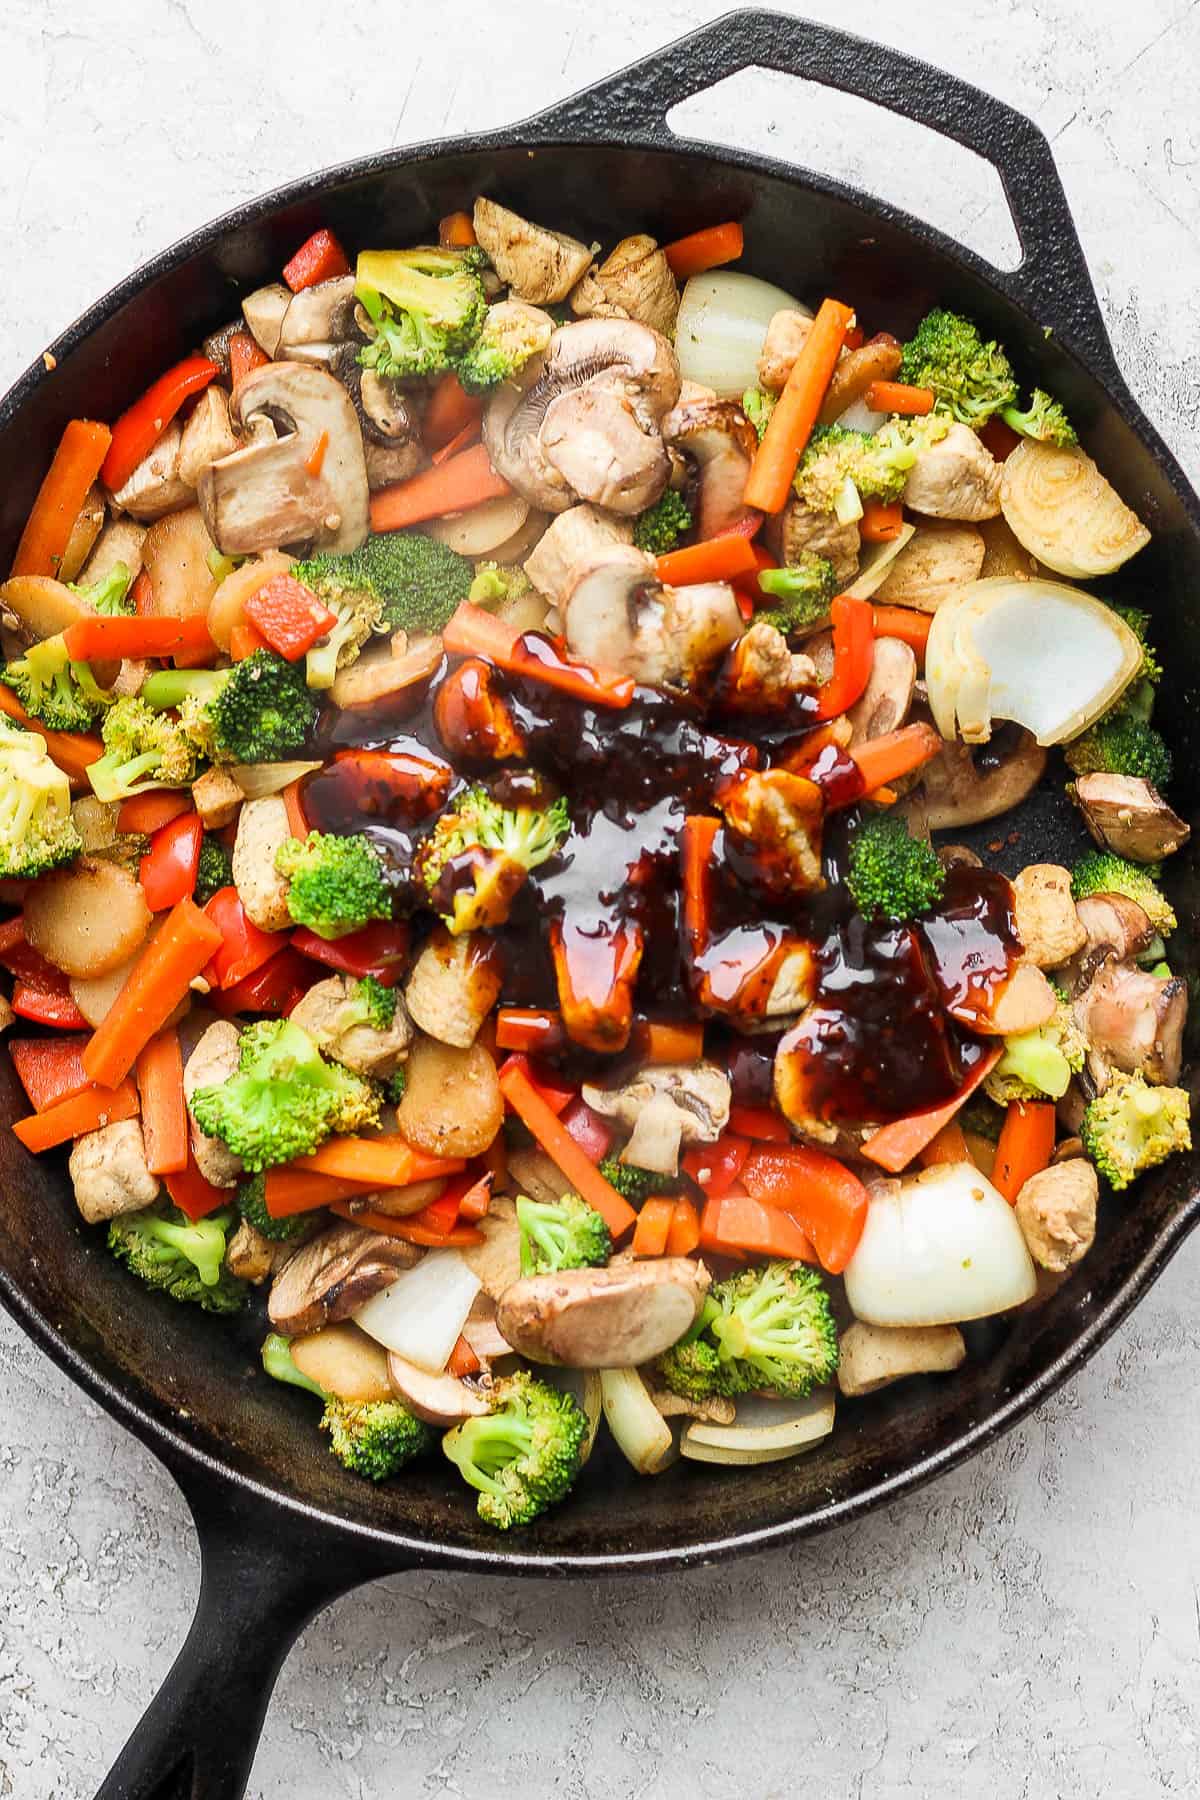 Teriyaki sauce poured on top of the chicken and veggies.